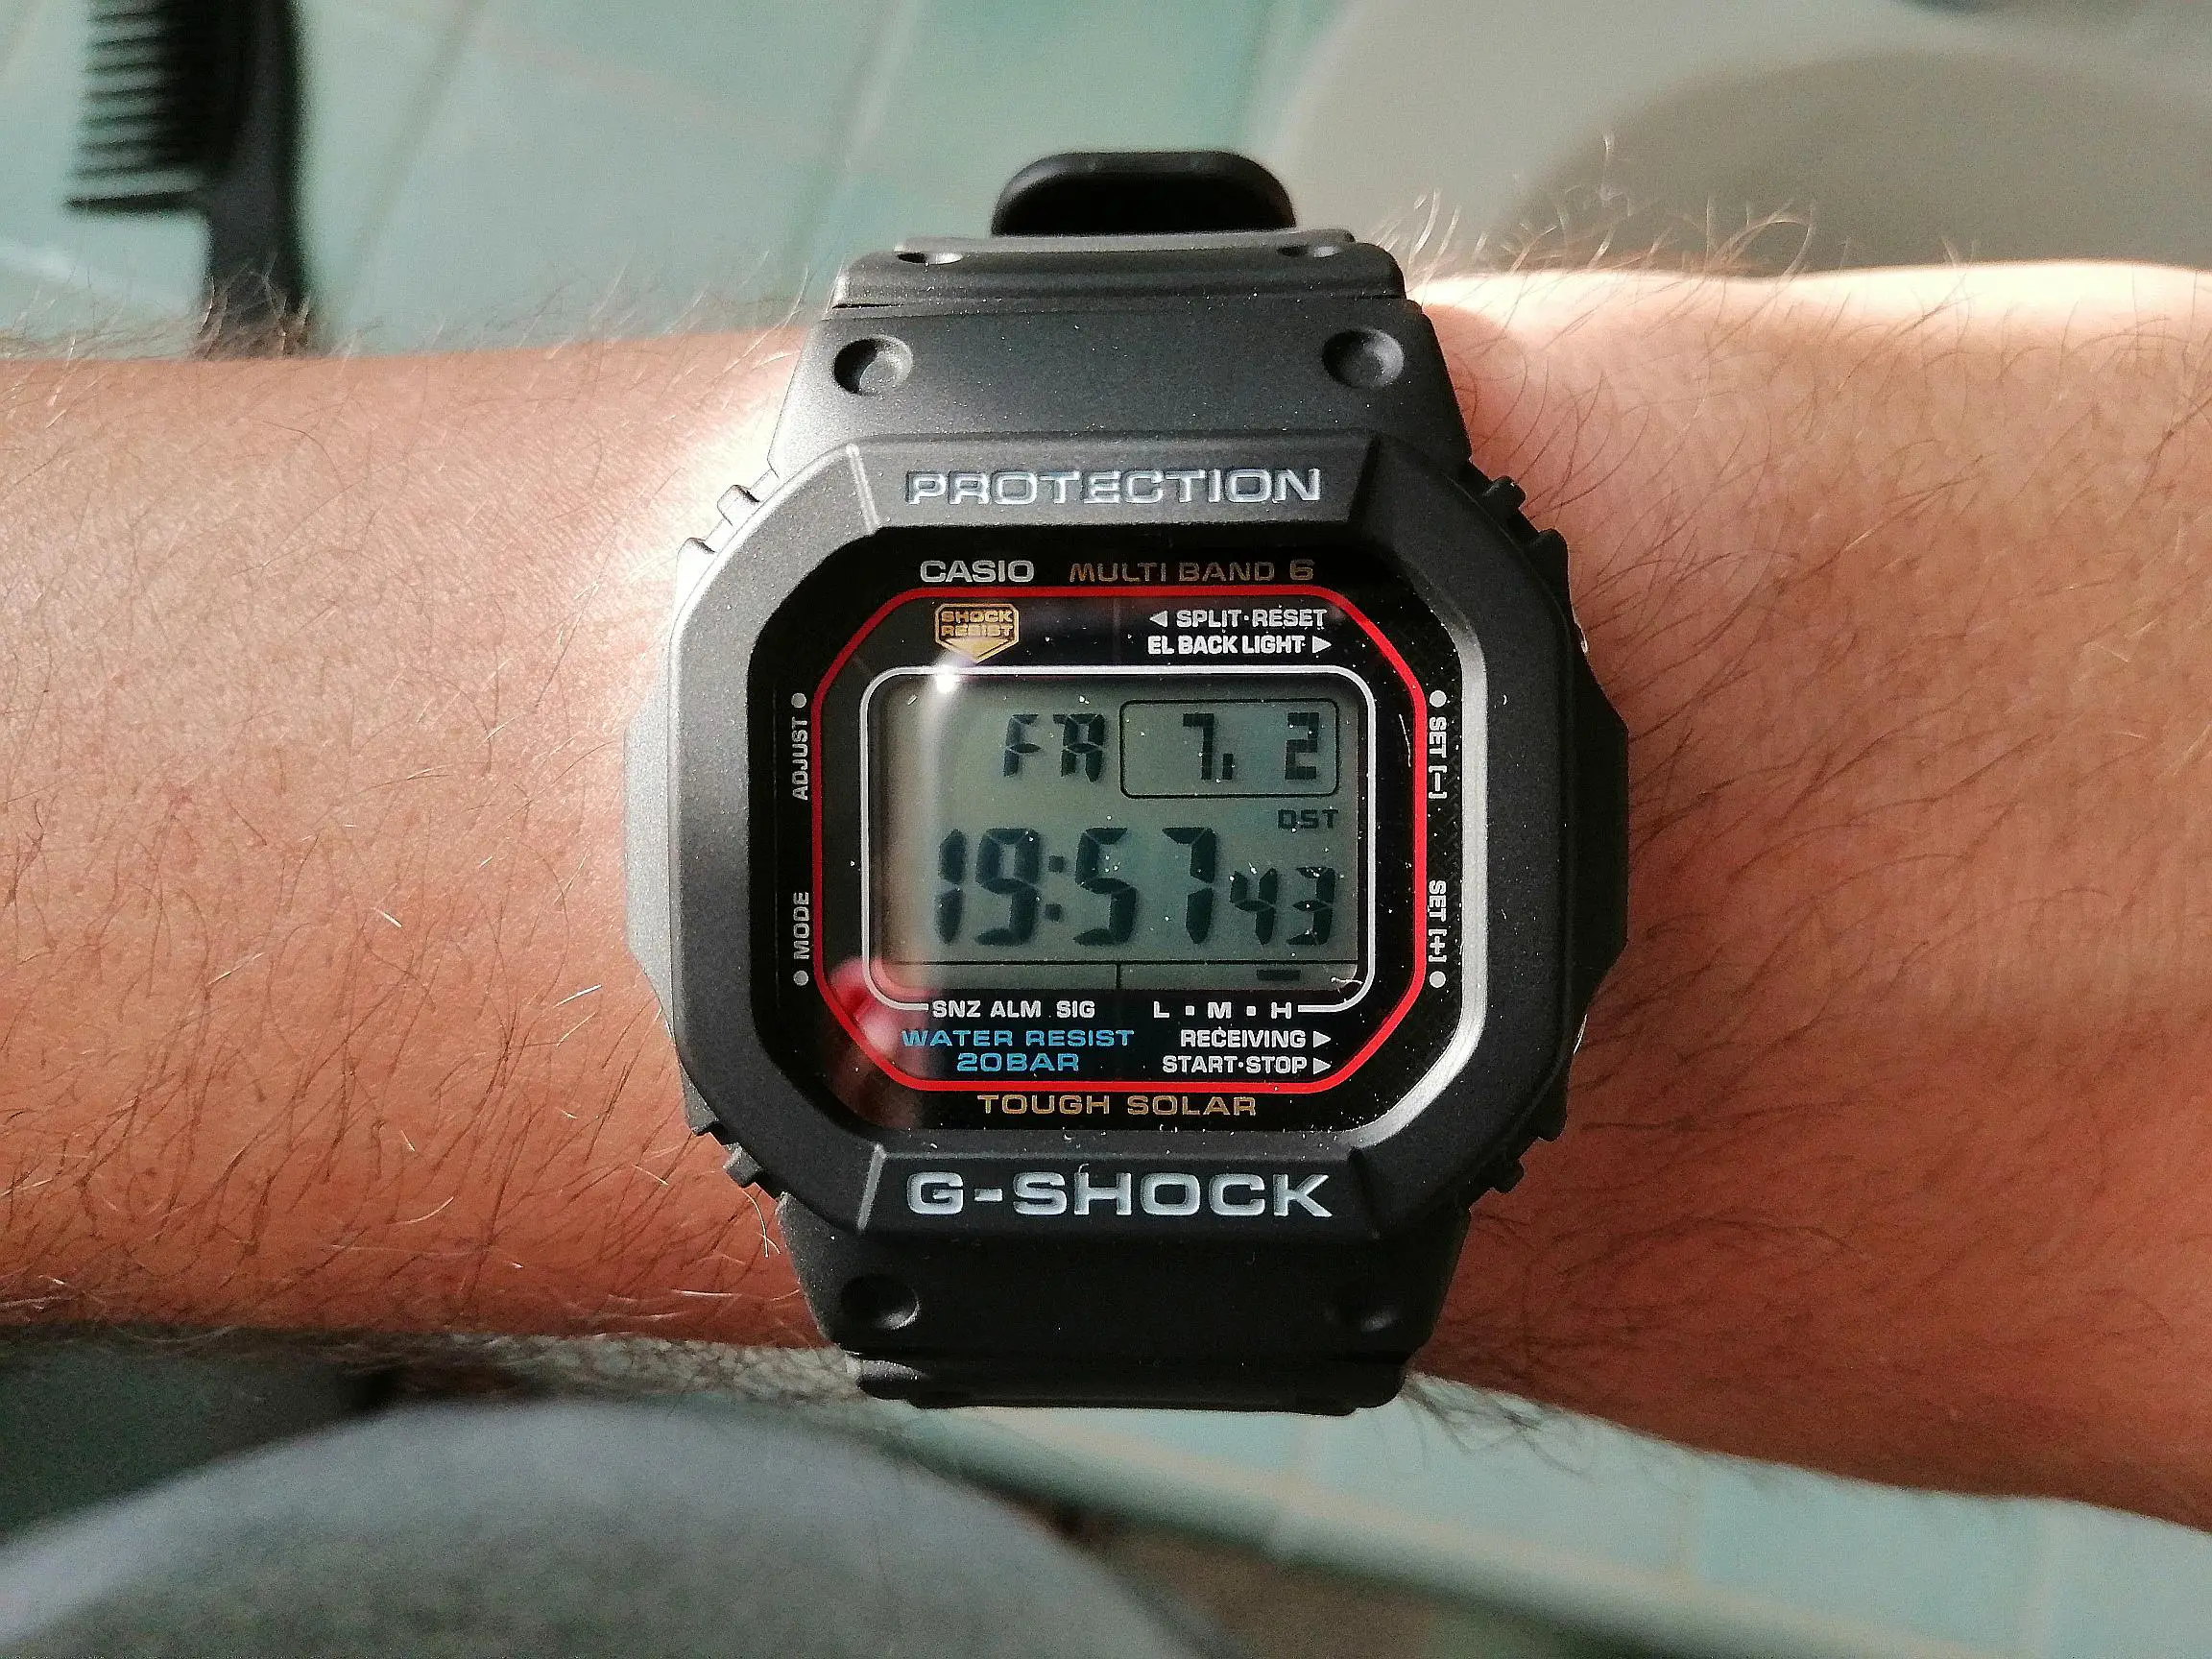 Why Are G-Shock Watches Costly?